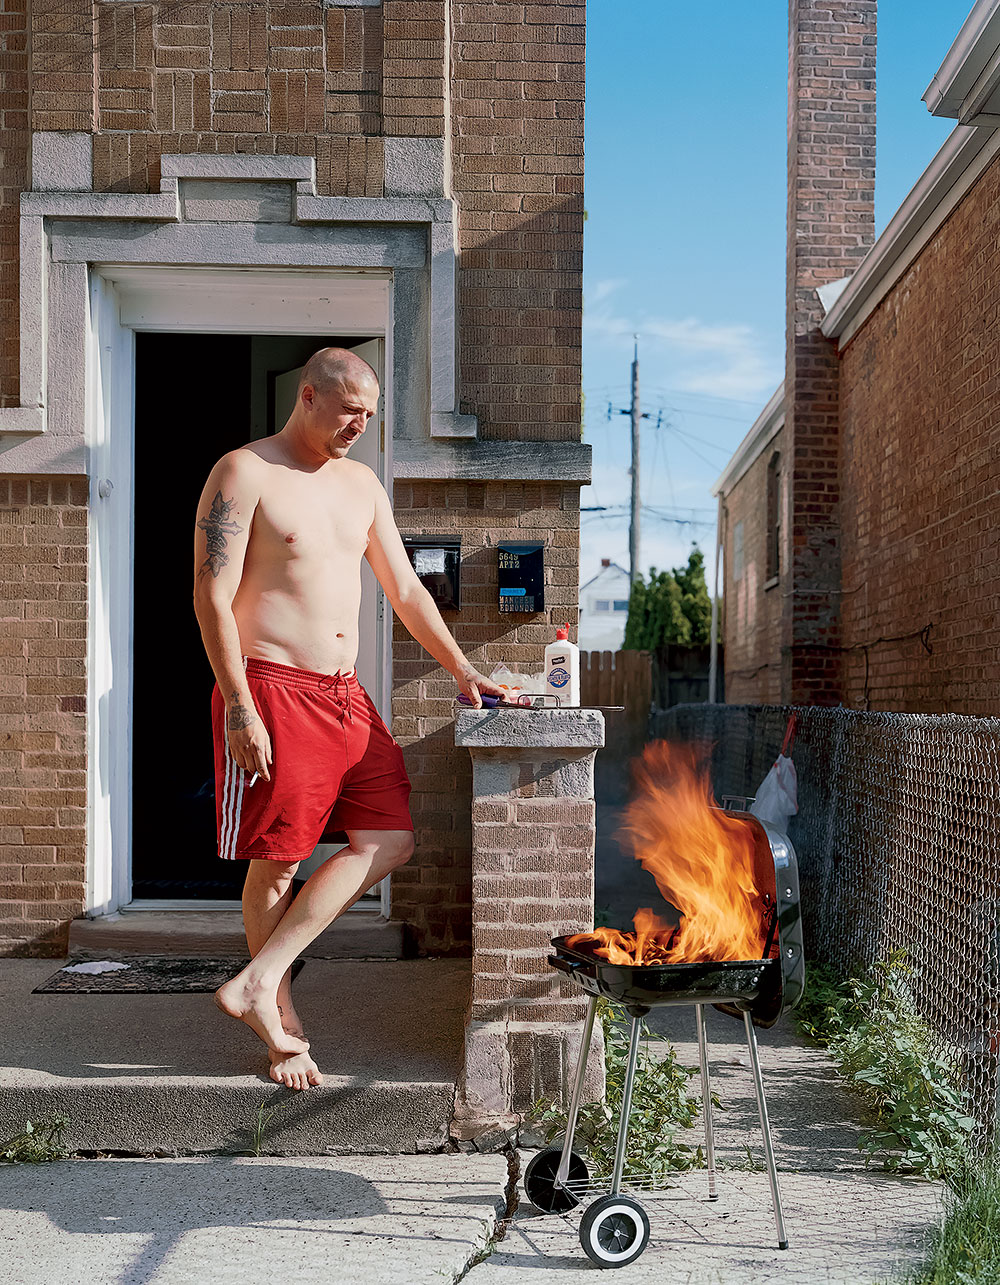 A man barbecuing in front of his home.